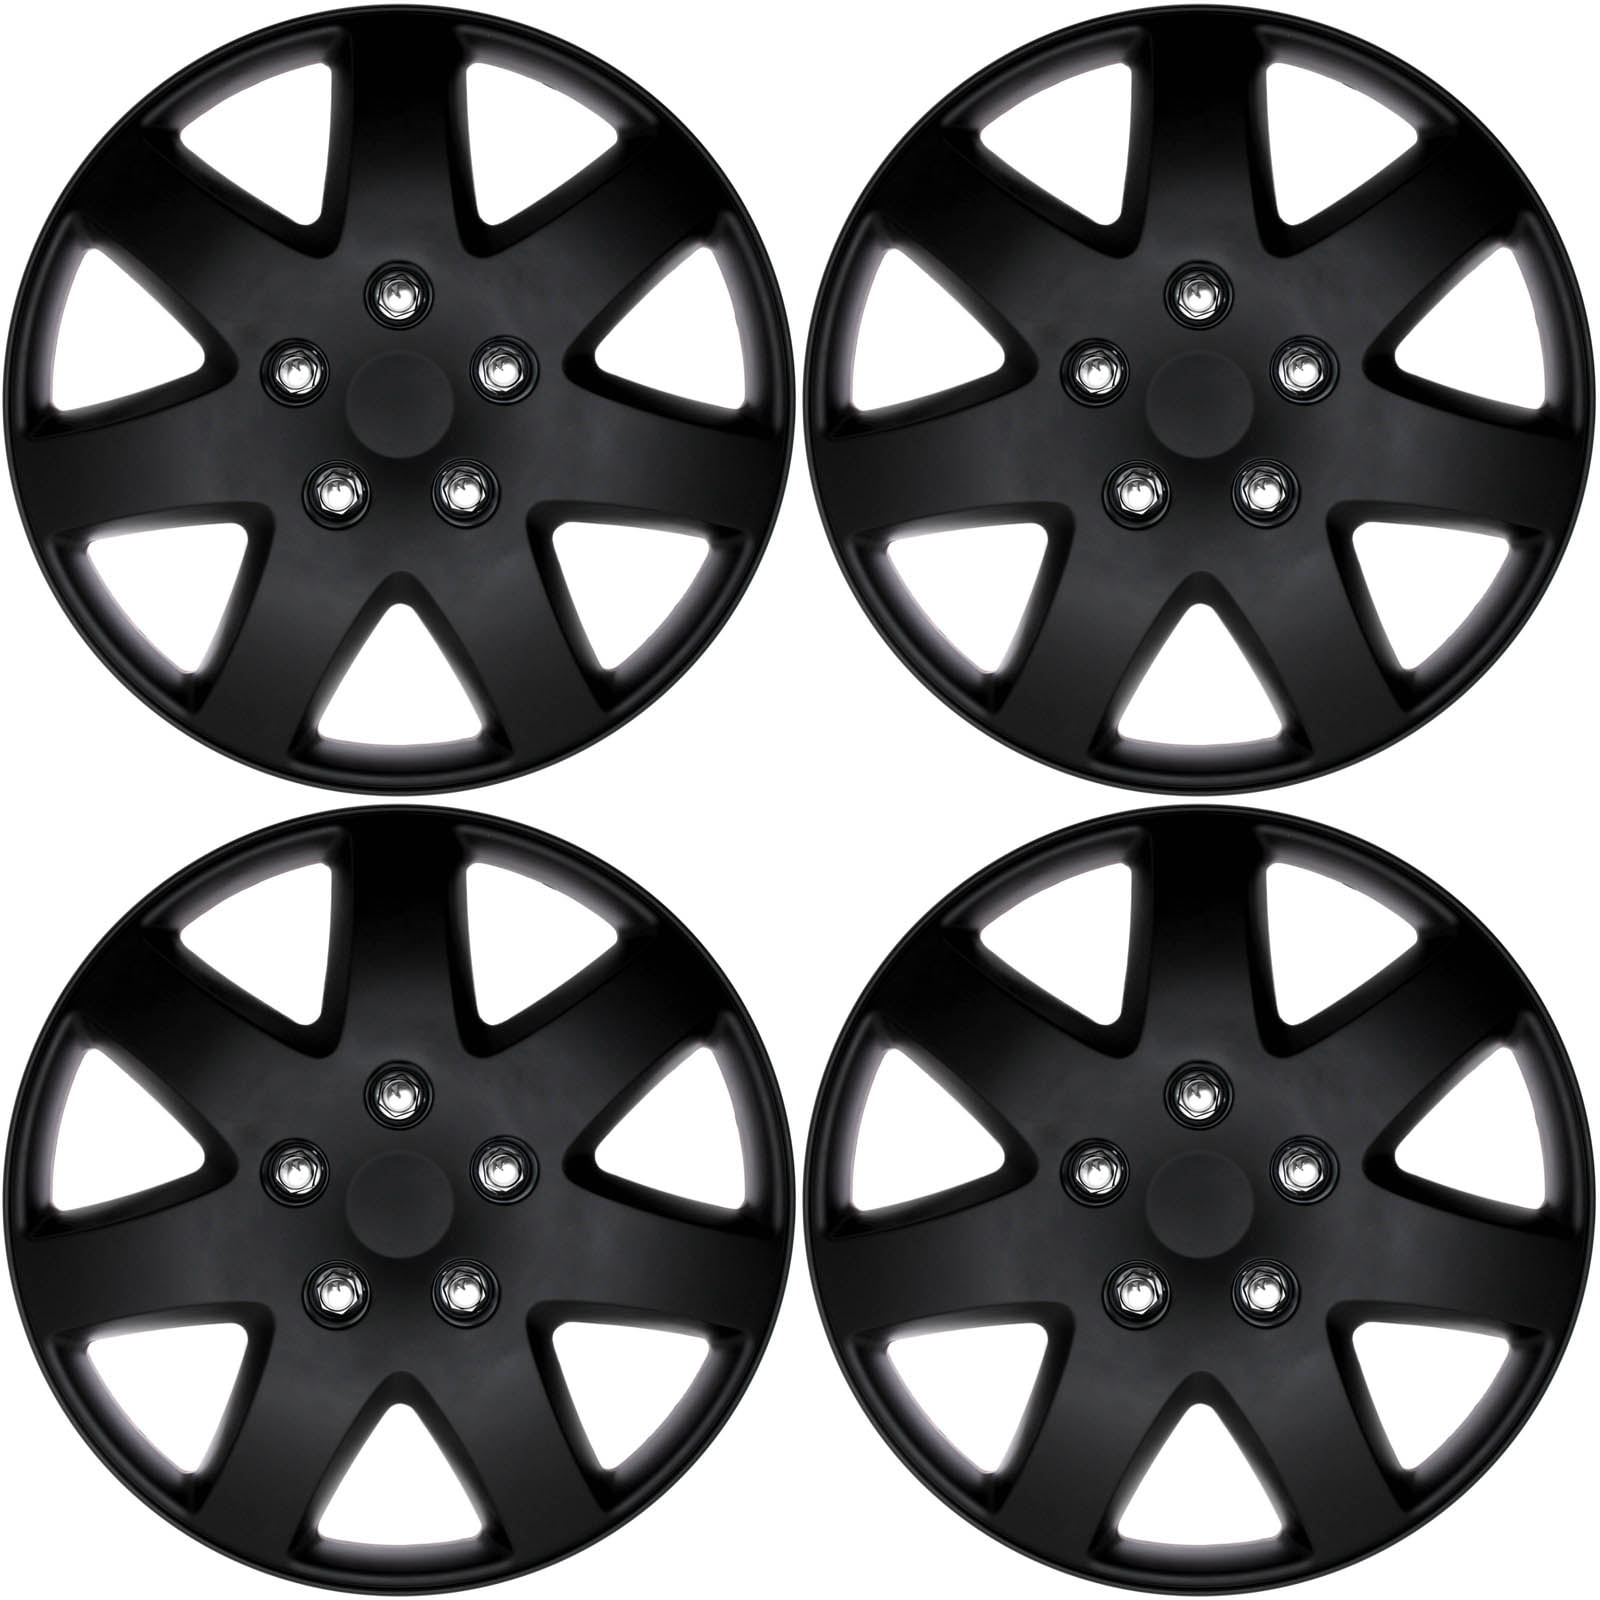 official RS collection 4x Genuine RS Renault Sport Wheel Valve Dust caps 